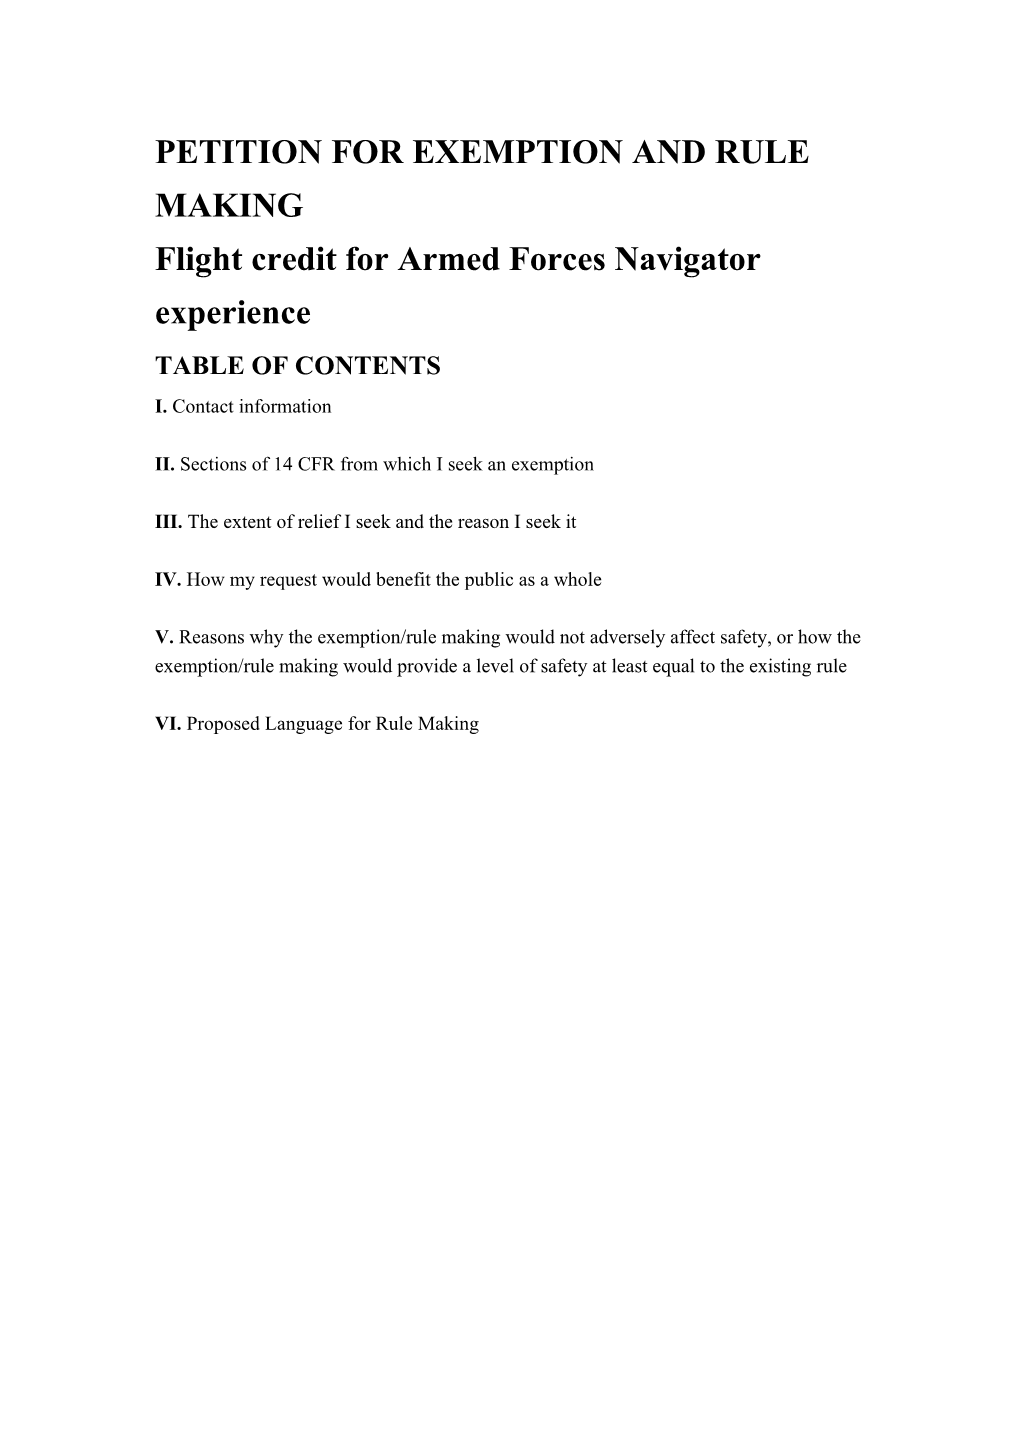 PETITION for EXEMPTION and RULE MAKING Flight Credit for Armed Forces Navigator Experience TABLE of CONTENTS I